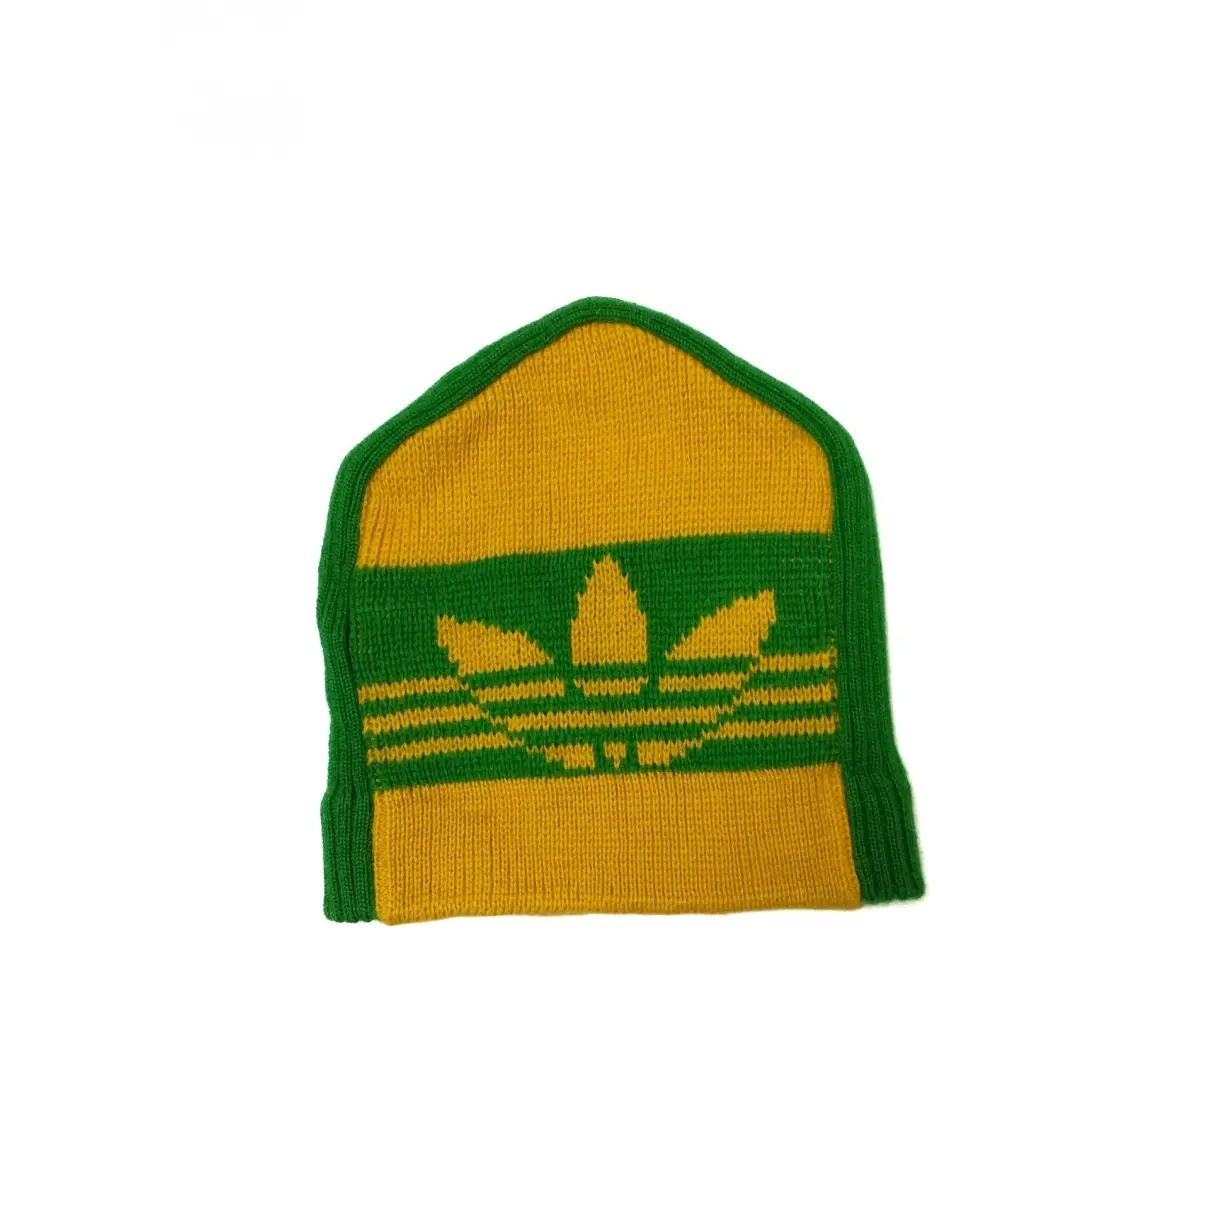 Adidas Wool hat for sale